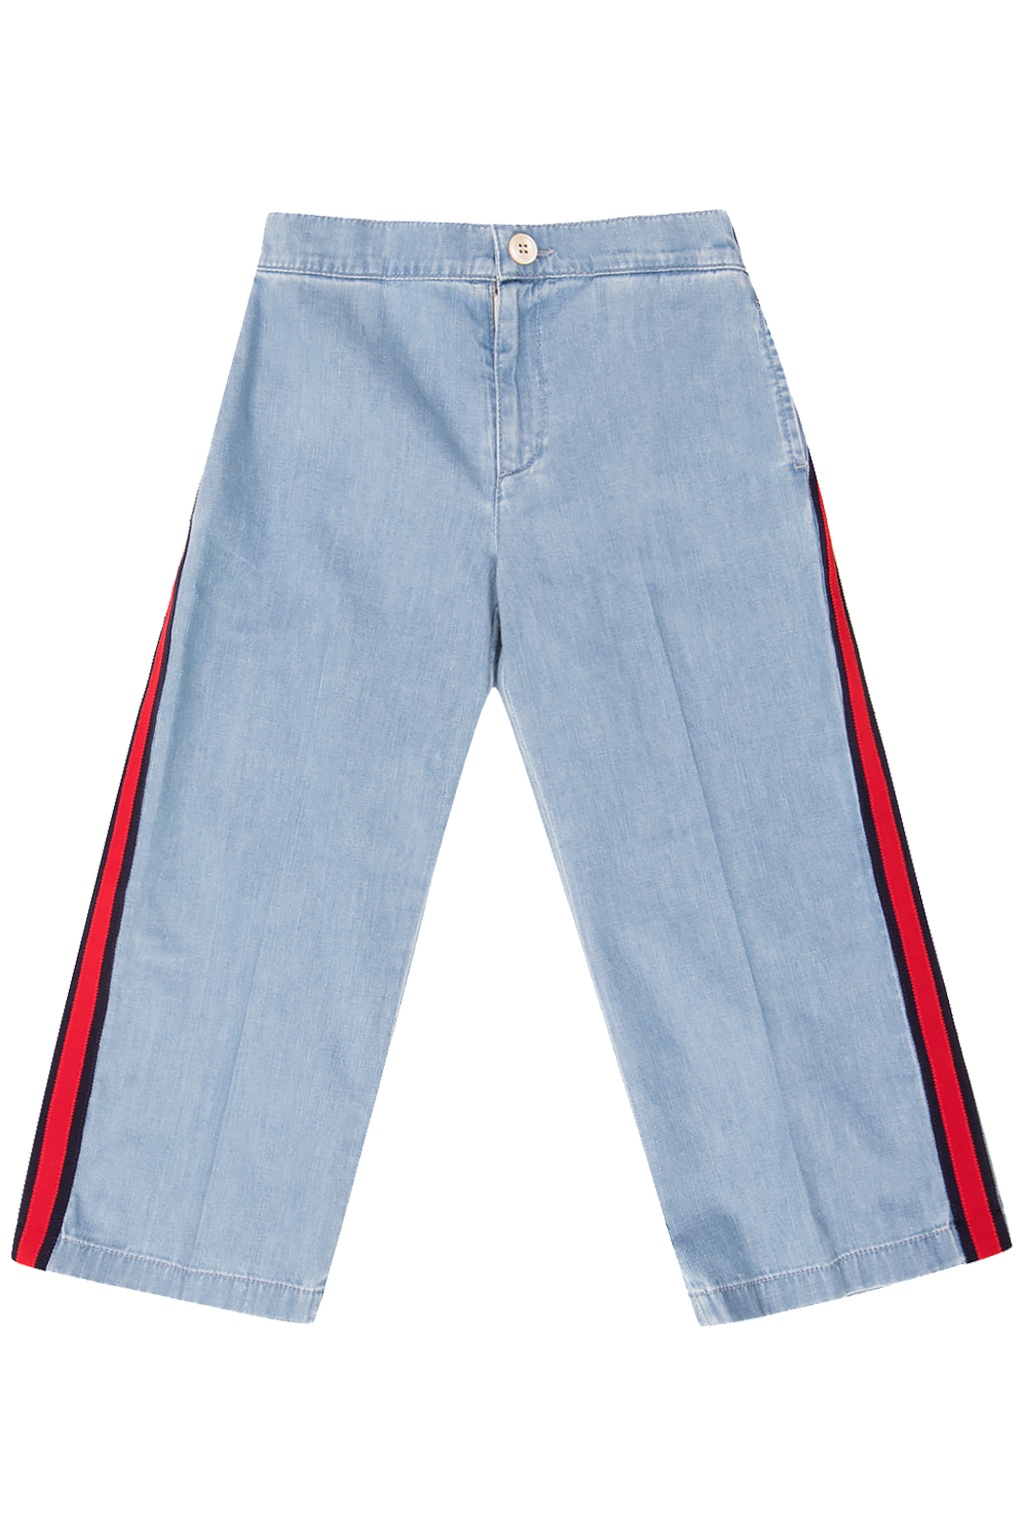 gucci jeans for kids